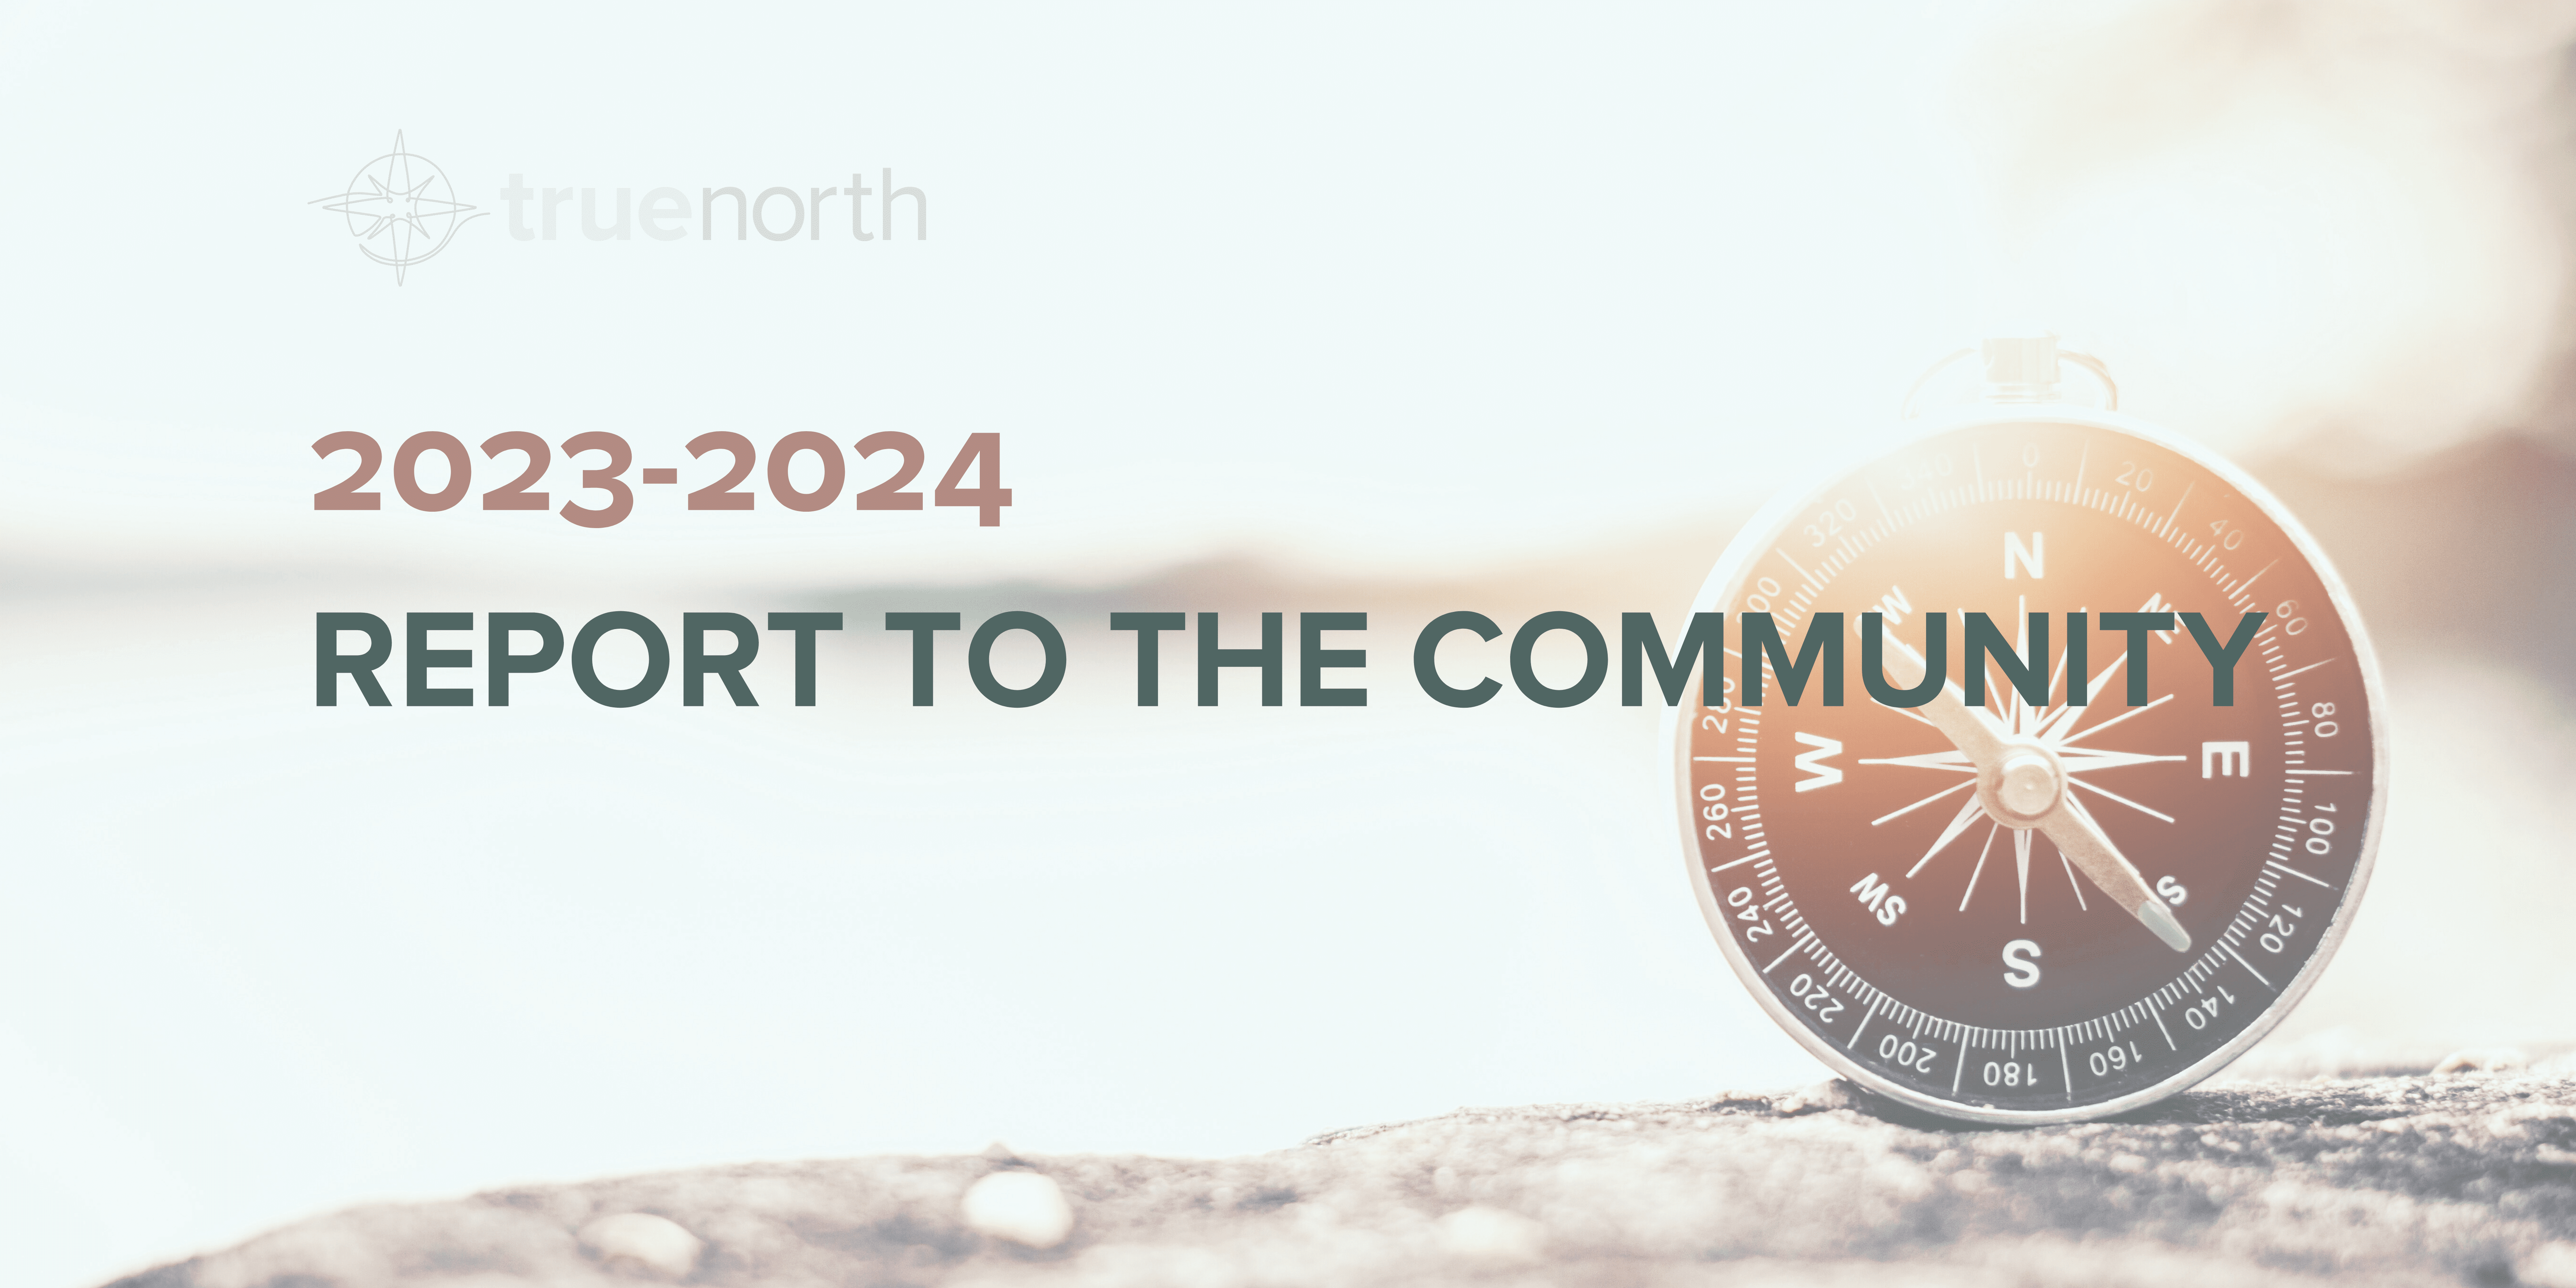 report to the community 2023-2024